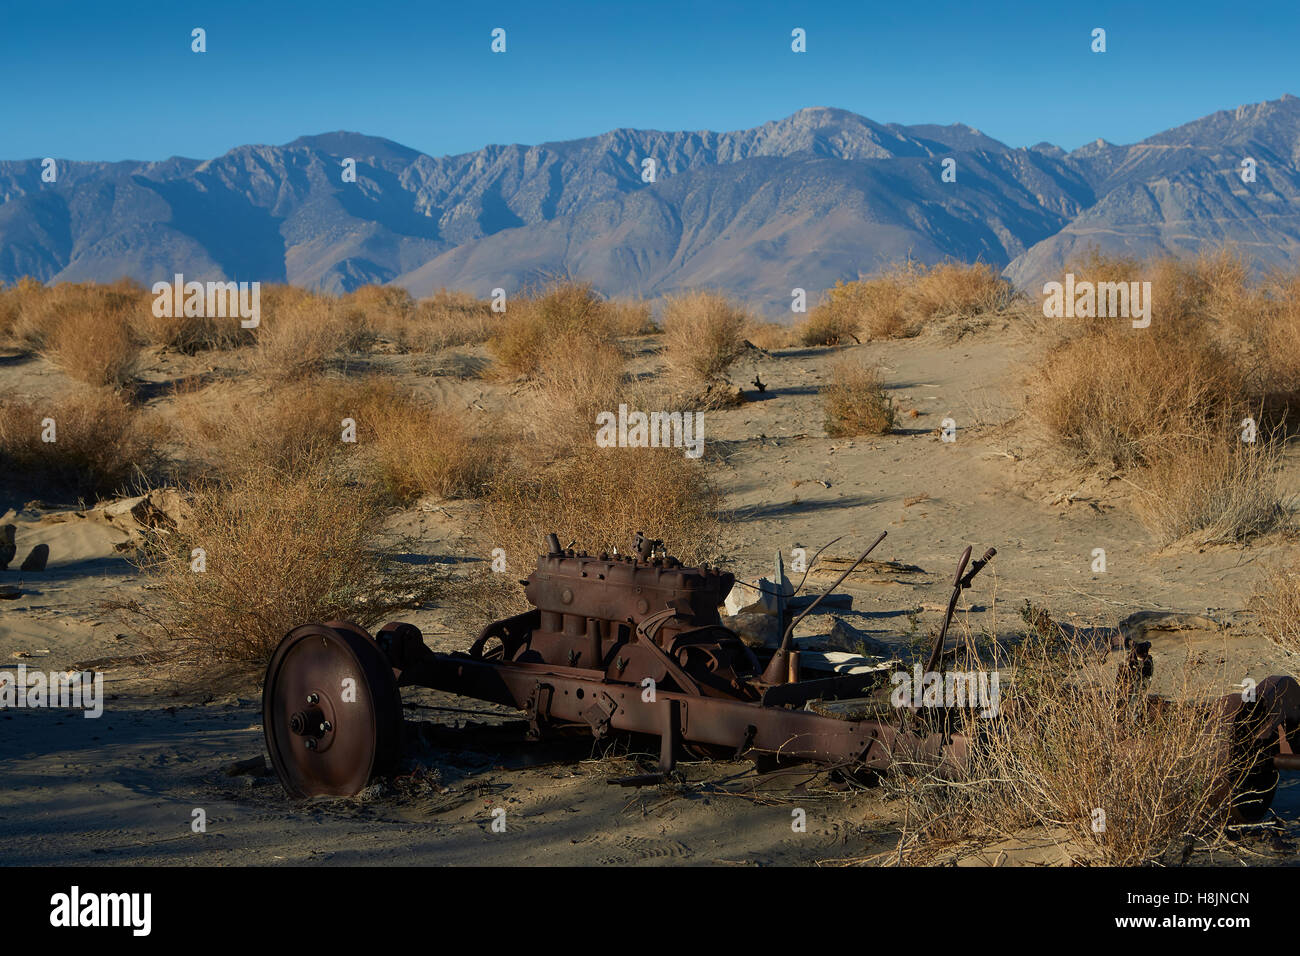 Abandoned Mining Equipment In The Owens Valley With The Sierra Nevada Mountain Range Behind. Stock Photo